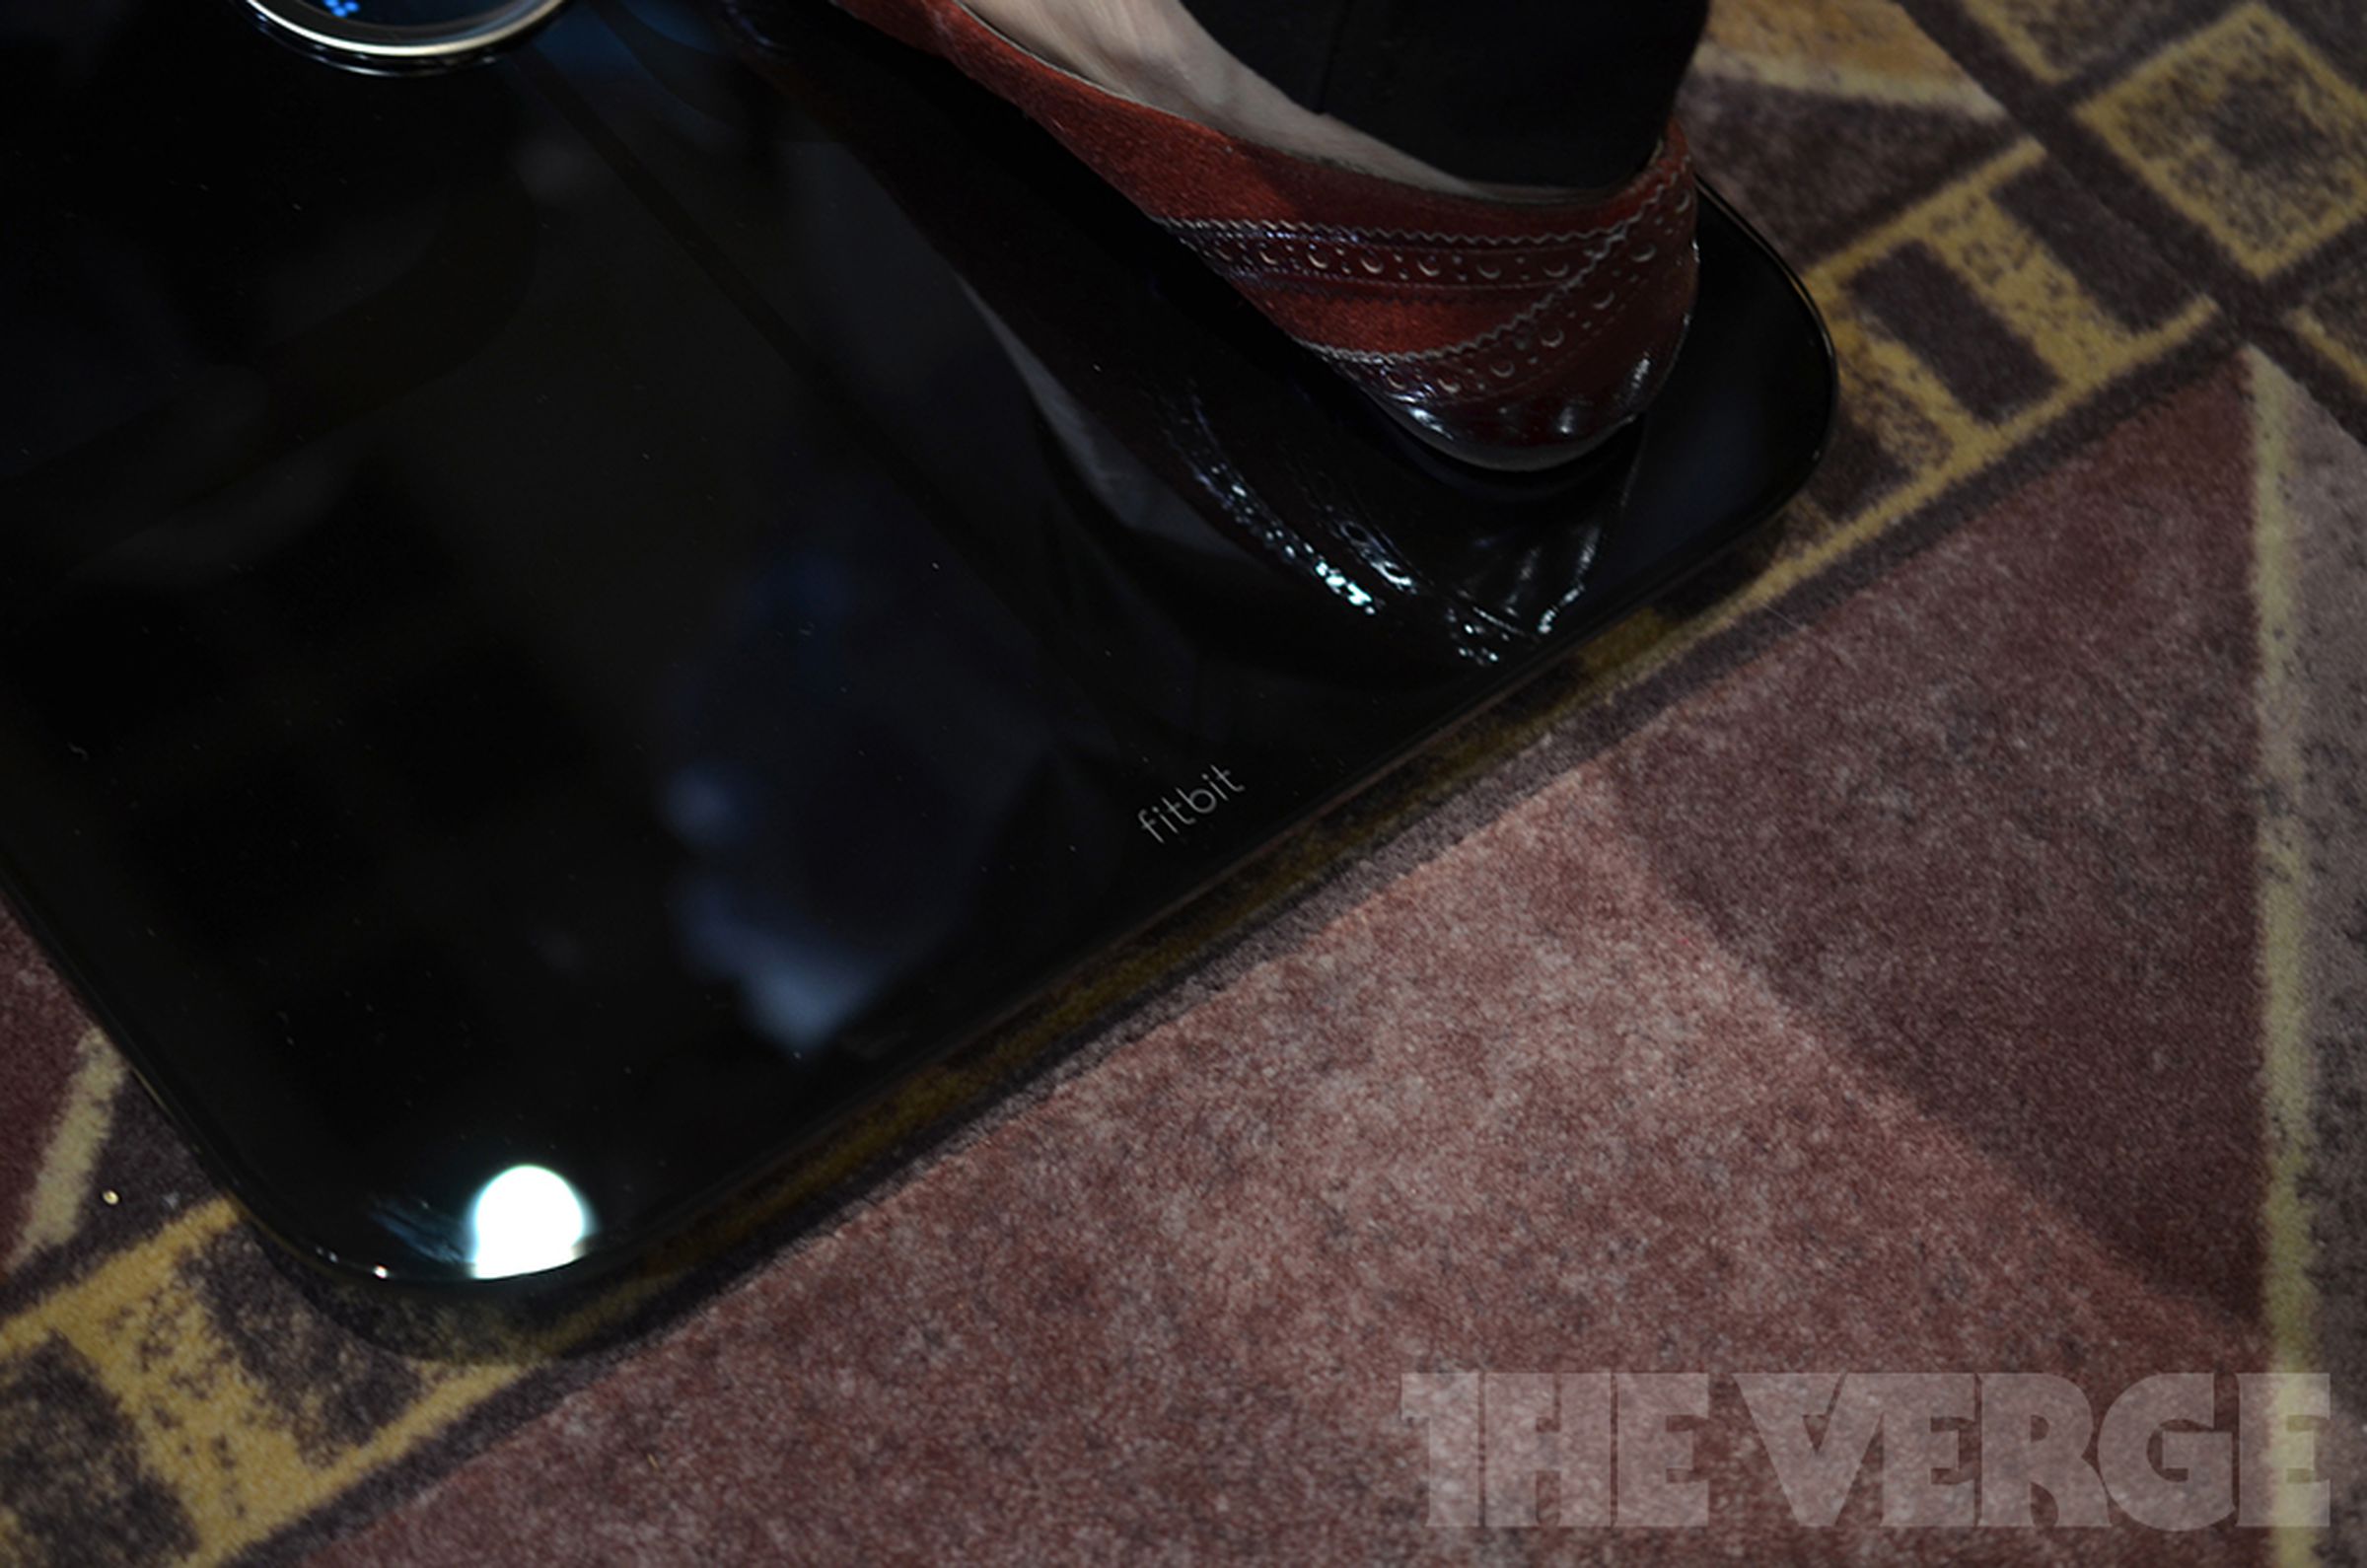 Fitbit Aria Wi-Fi Smart Scale hands-on photos